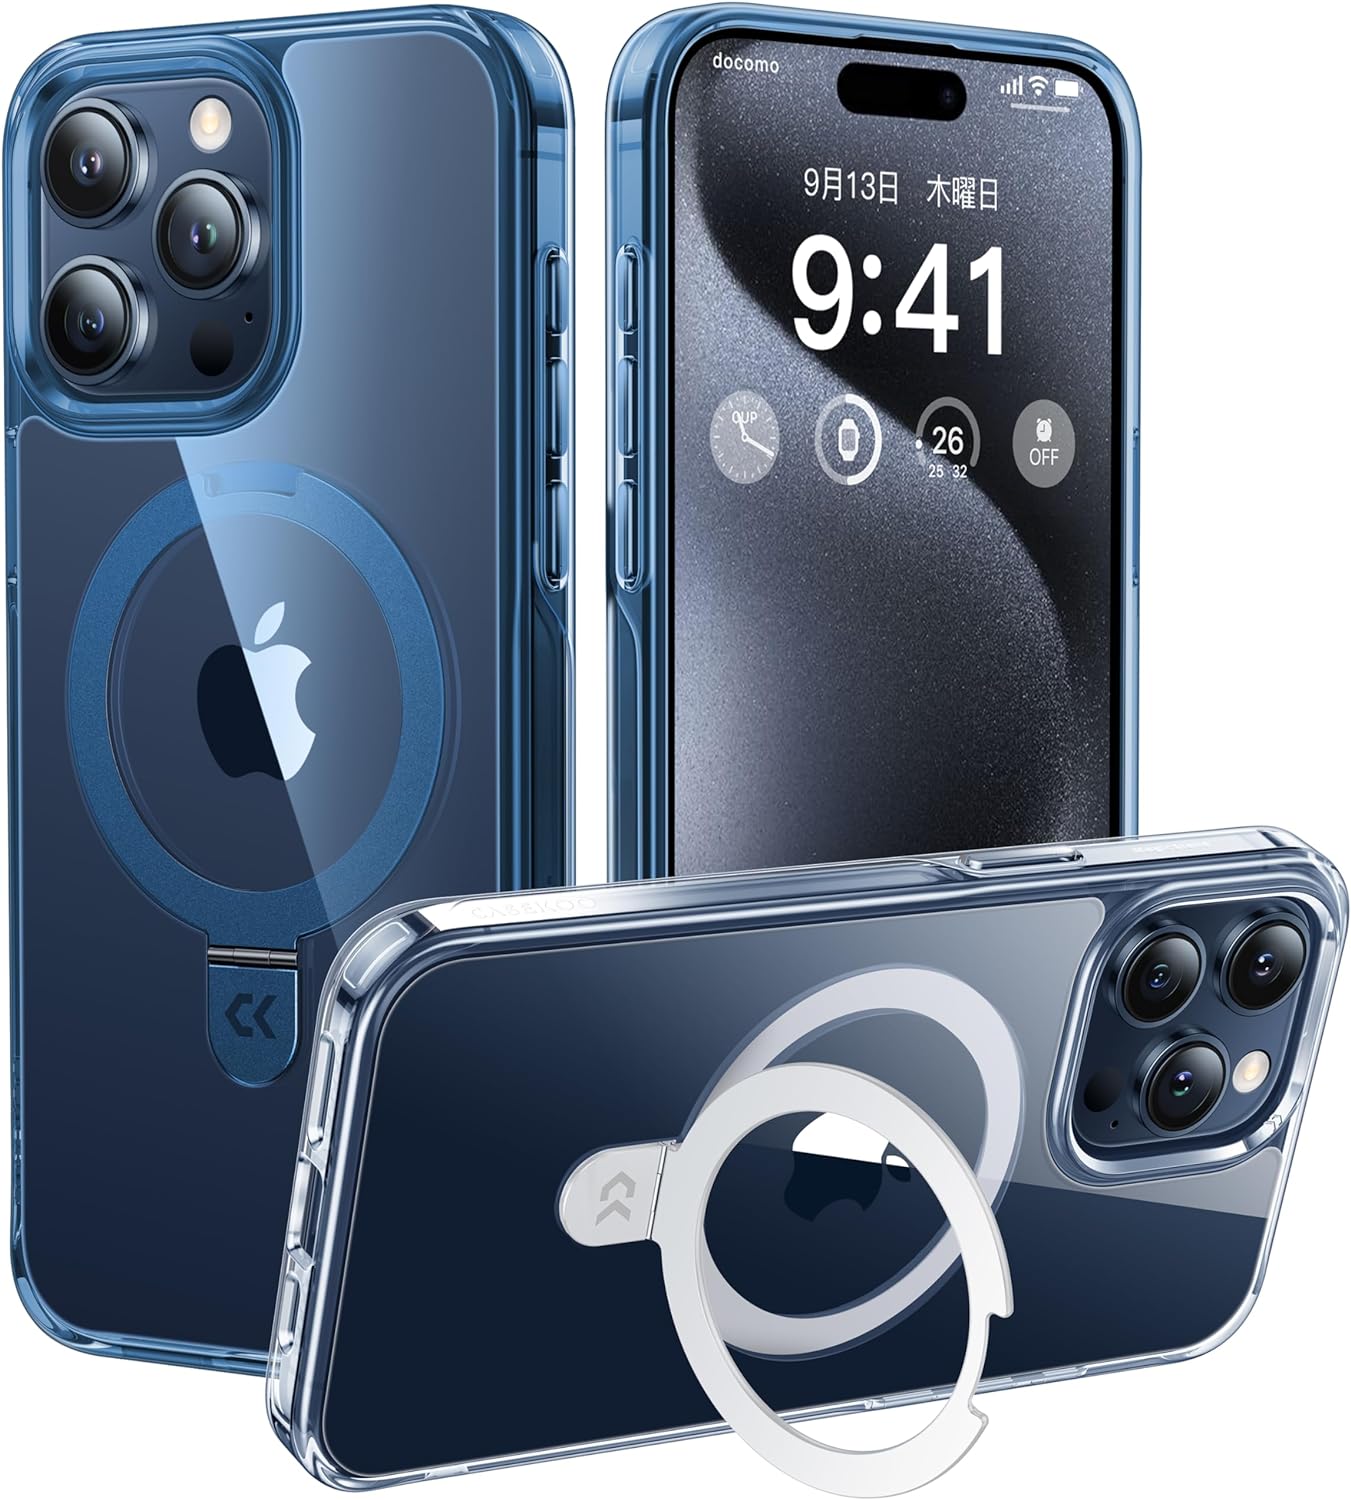 Price Drop Alert! CASEKOO for iPhone 15 Pro Max Case, Military Drop Protection, Compatible with MagSafe, Build in Magnetic Stand, Non-Yellowing Slim Holder for Women Men 6.7 Inch 2023, Blue Blue for iPhone 15 Pro Max - Limited Offer!